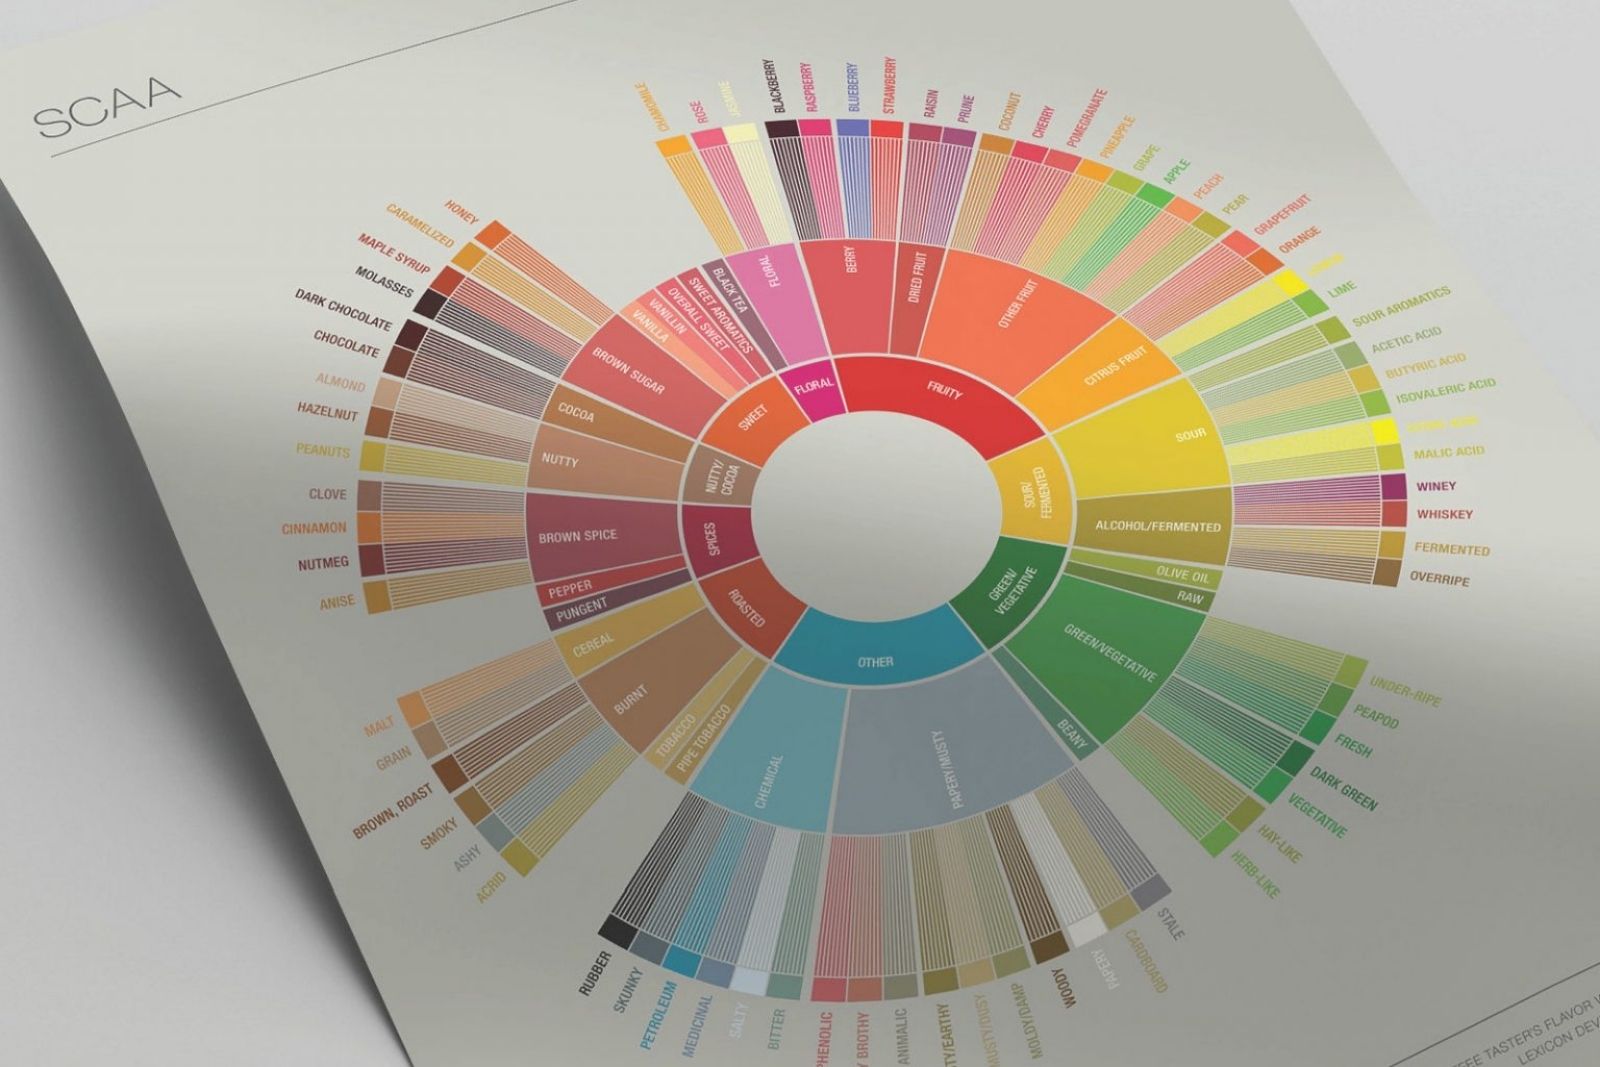 A Beginner's Guide To Coffee Flavour Profiles